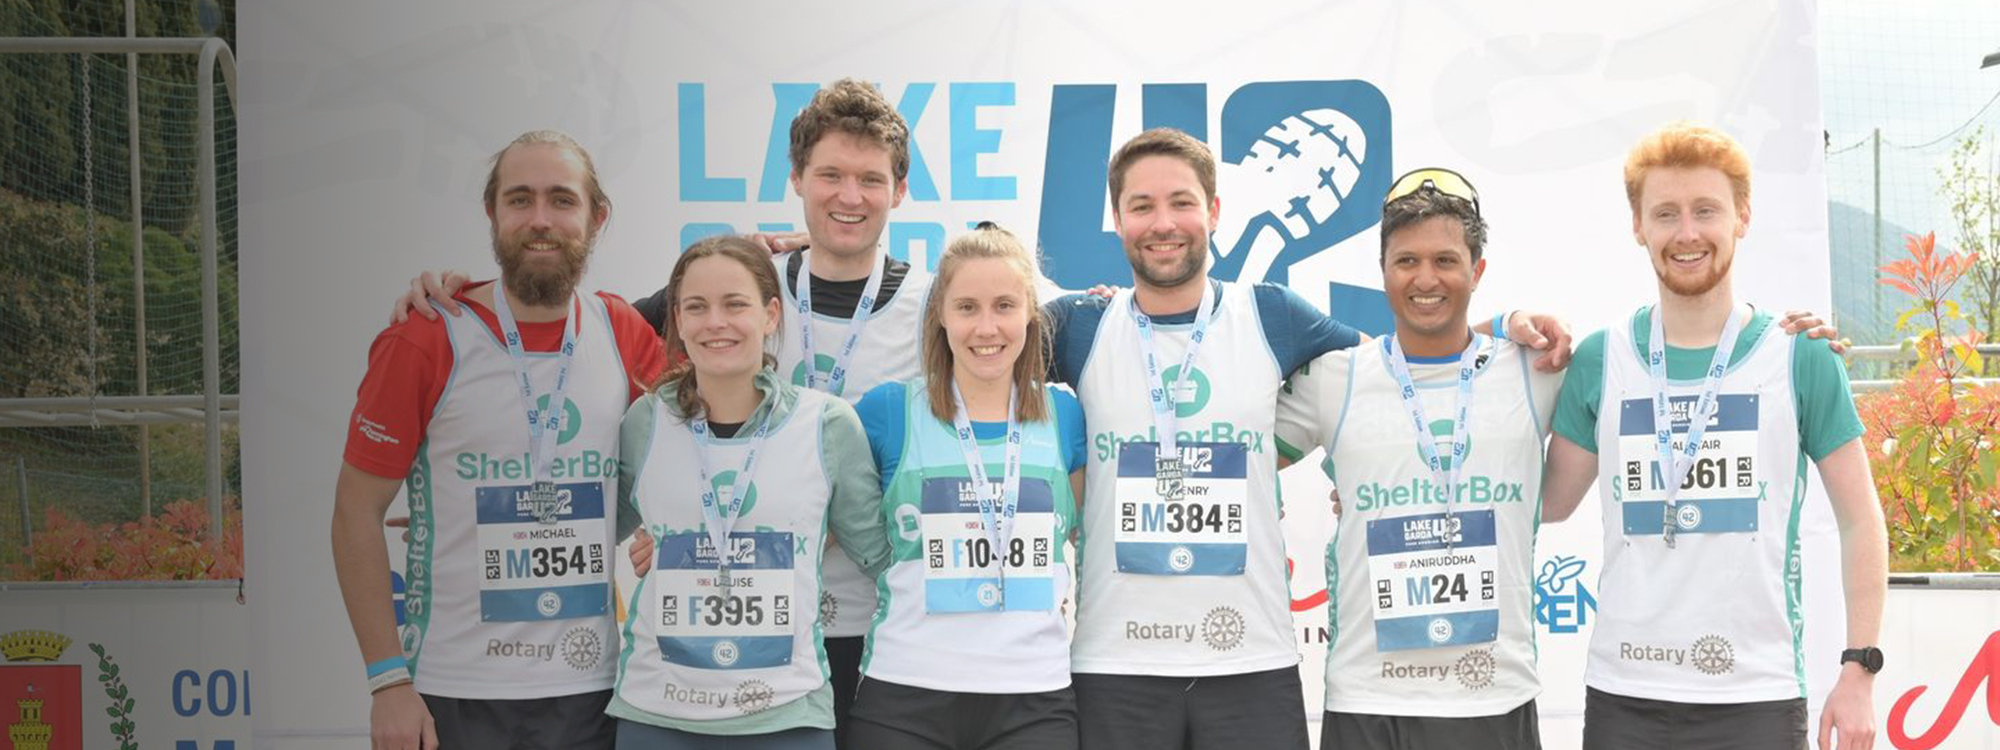 A group of people posing before running a marathon